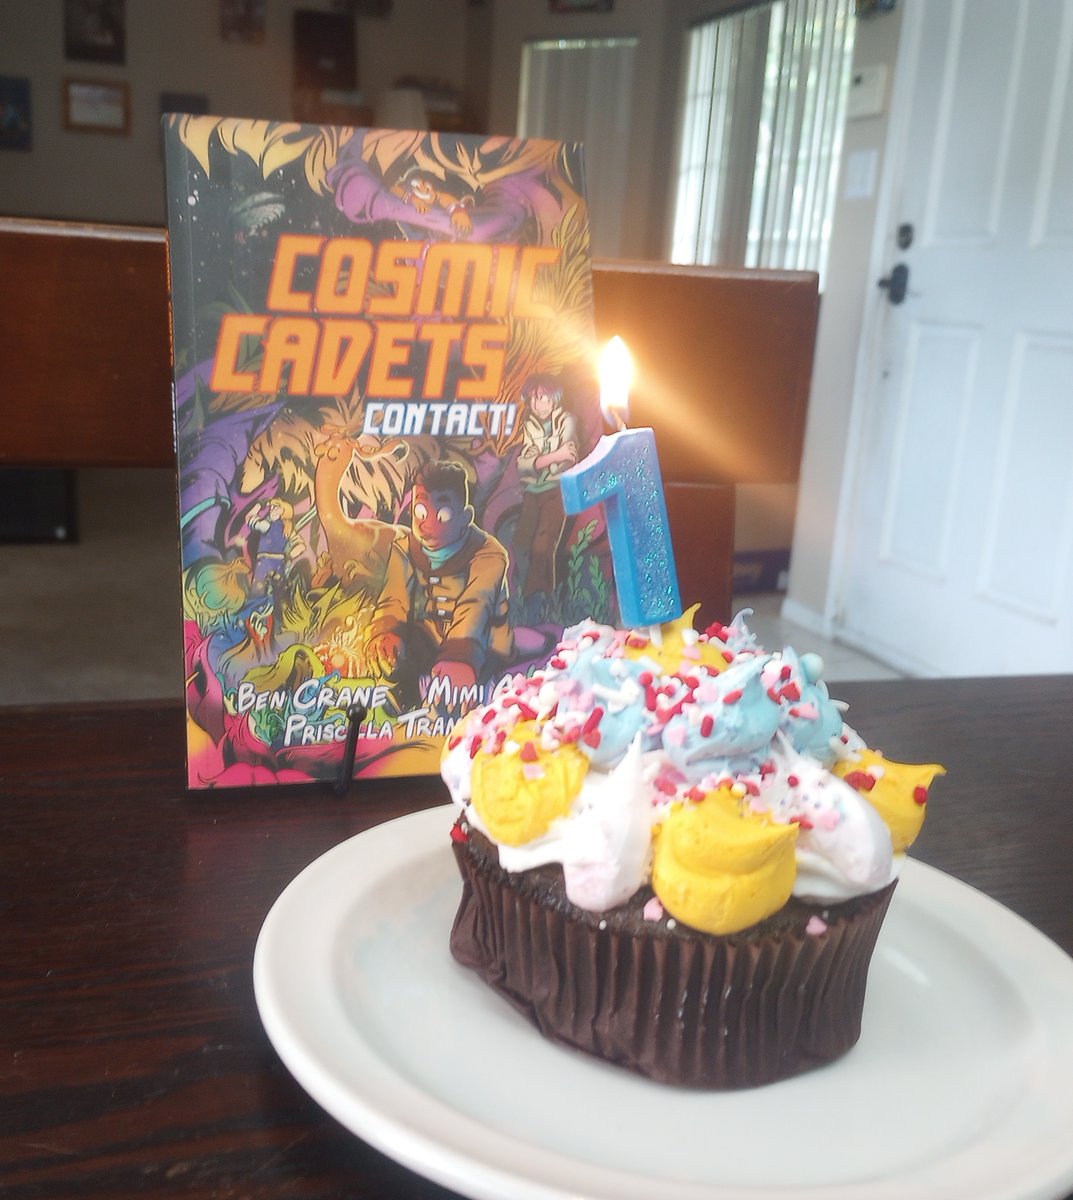 Happy Birthday to some very special #CosmicCadets! I can't believe it's been a year since we sent these kids out to the stars. Thank you to everyone who has helped make their voyage such a success! #Comics #Kidslit #bookbirthday
@MimiLAlves @Pr1ps @topshelfcomix @IDWPublishing